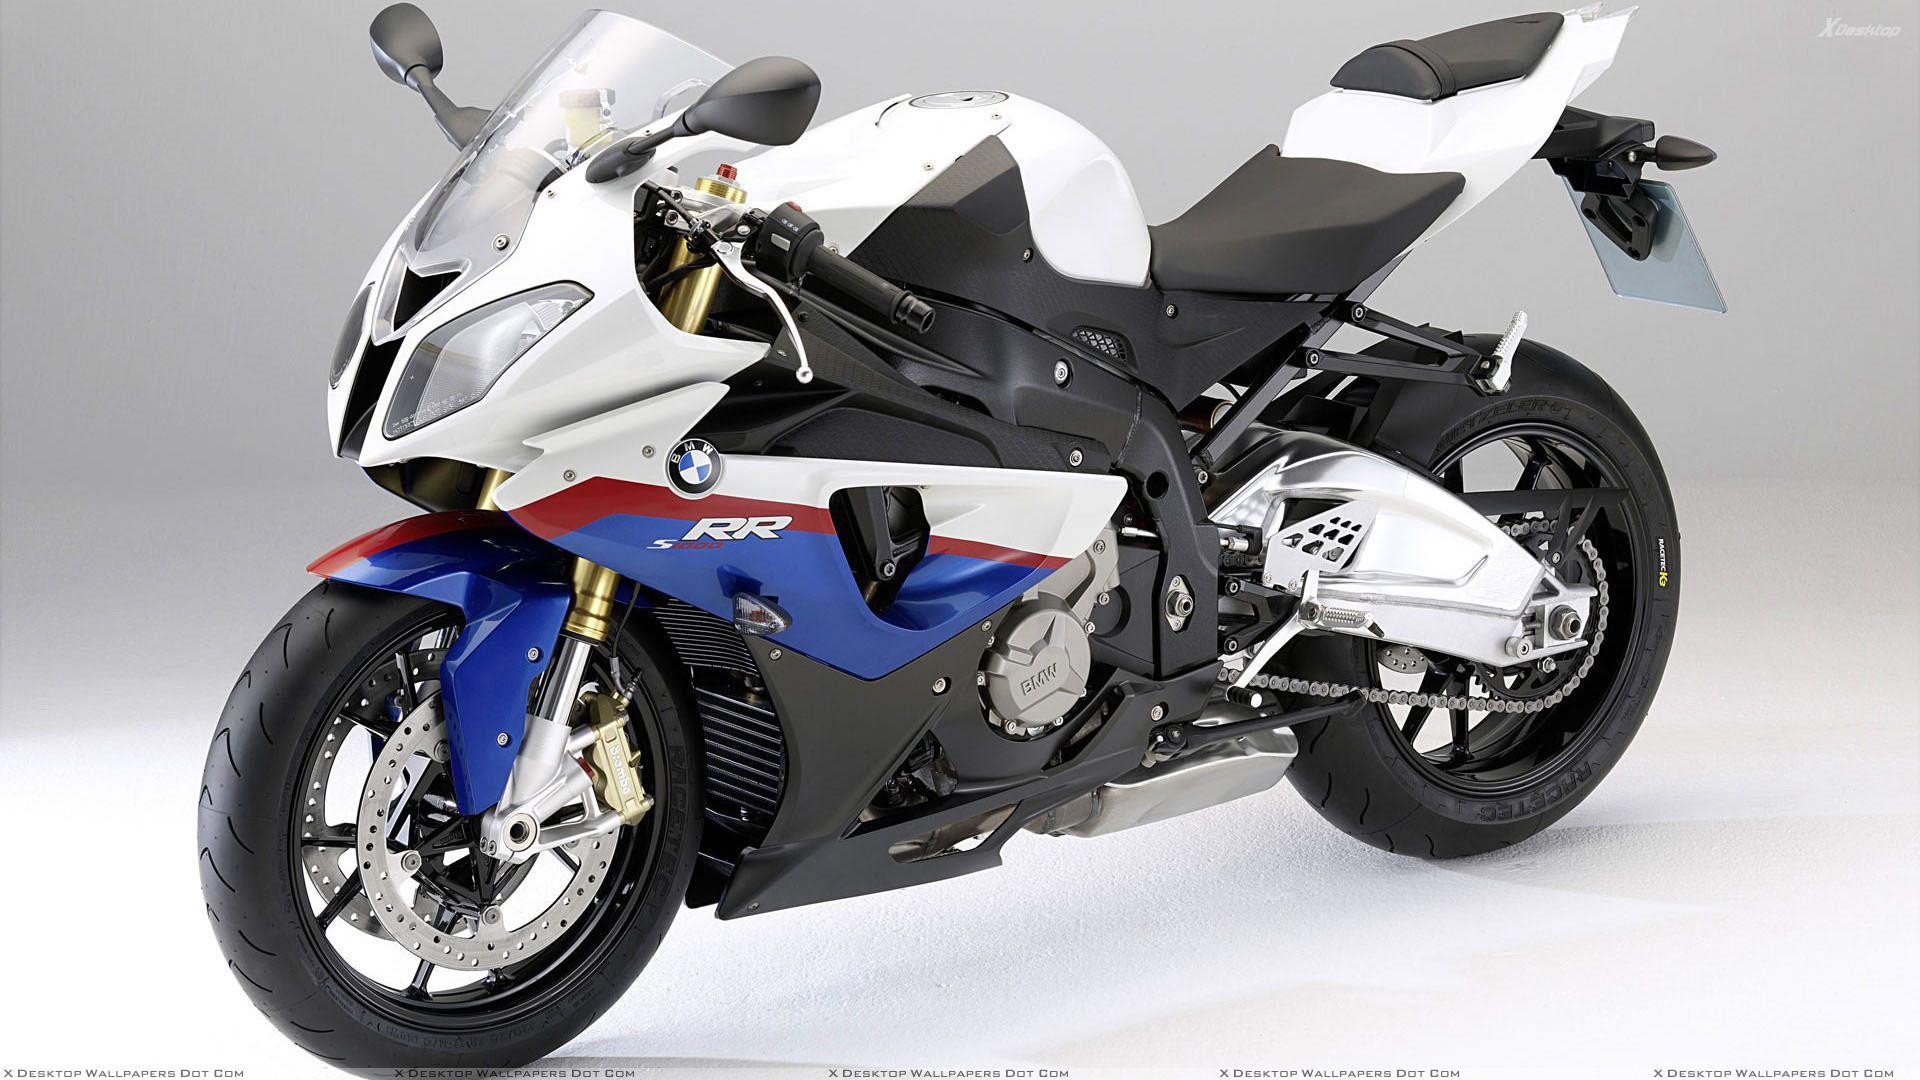 BMW S1000RR Wallpaper, Photo & Image in HD